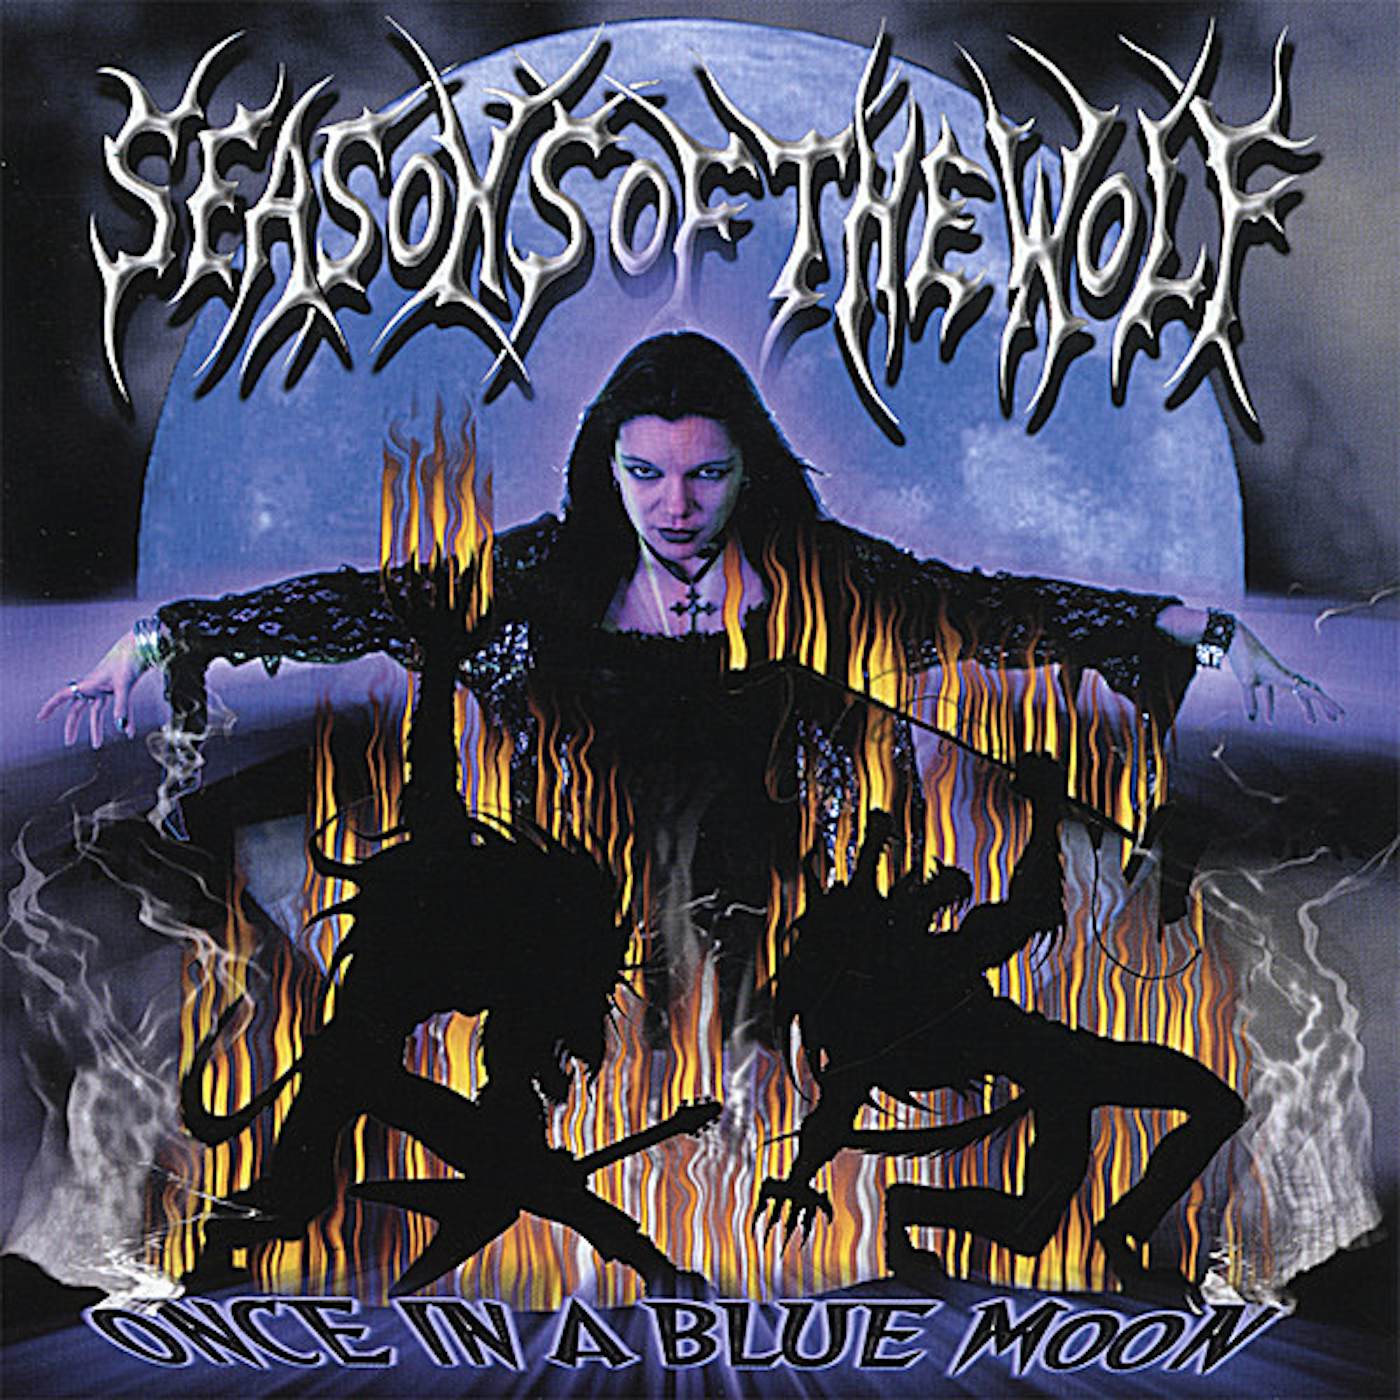 Seasons of the Wolf ONCE IN A BLUE MOON CD